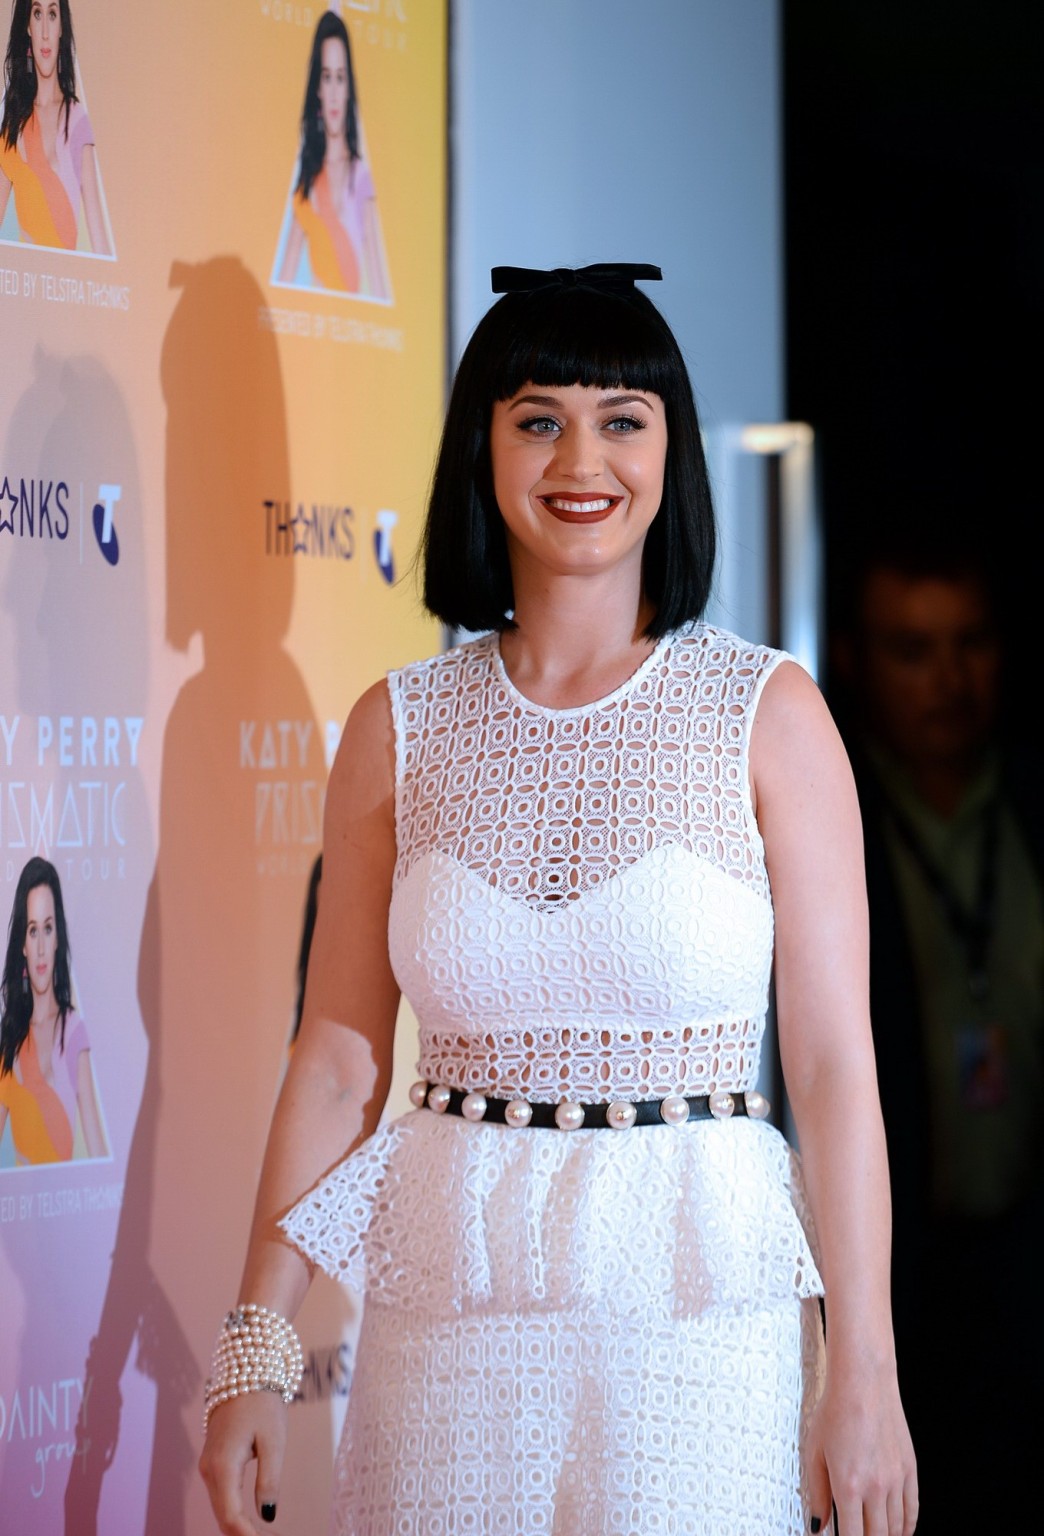 Katy Perry busty wearing a partially see through dress at Telstra in Sydney #75203067